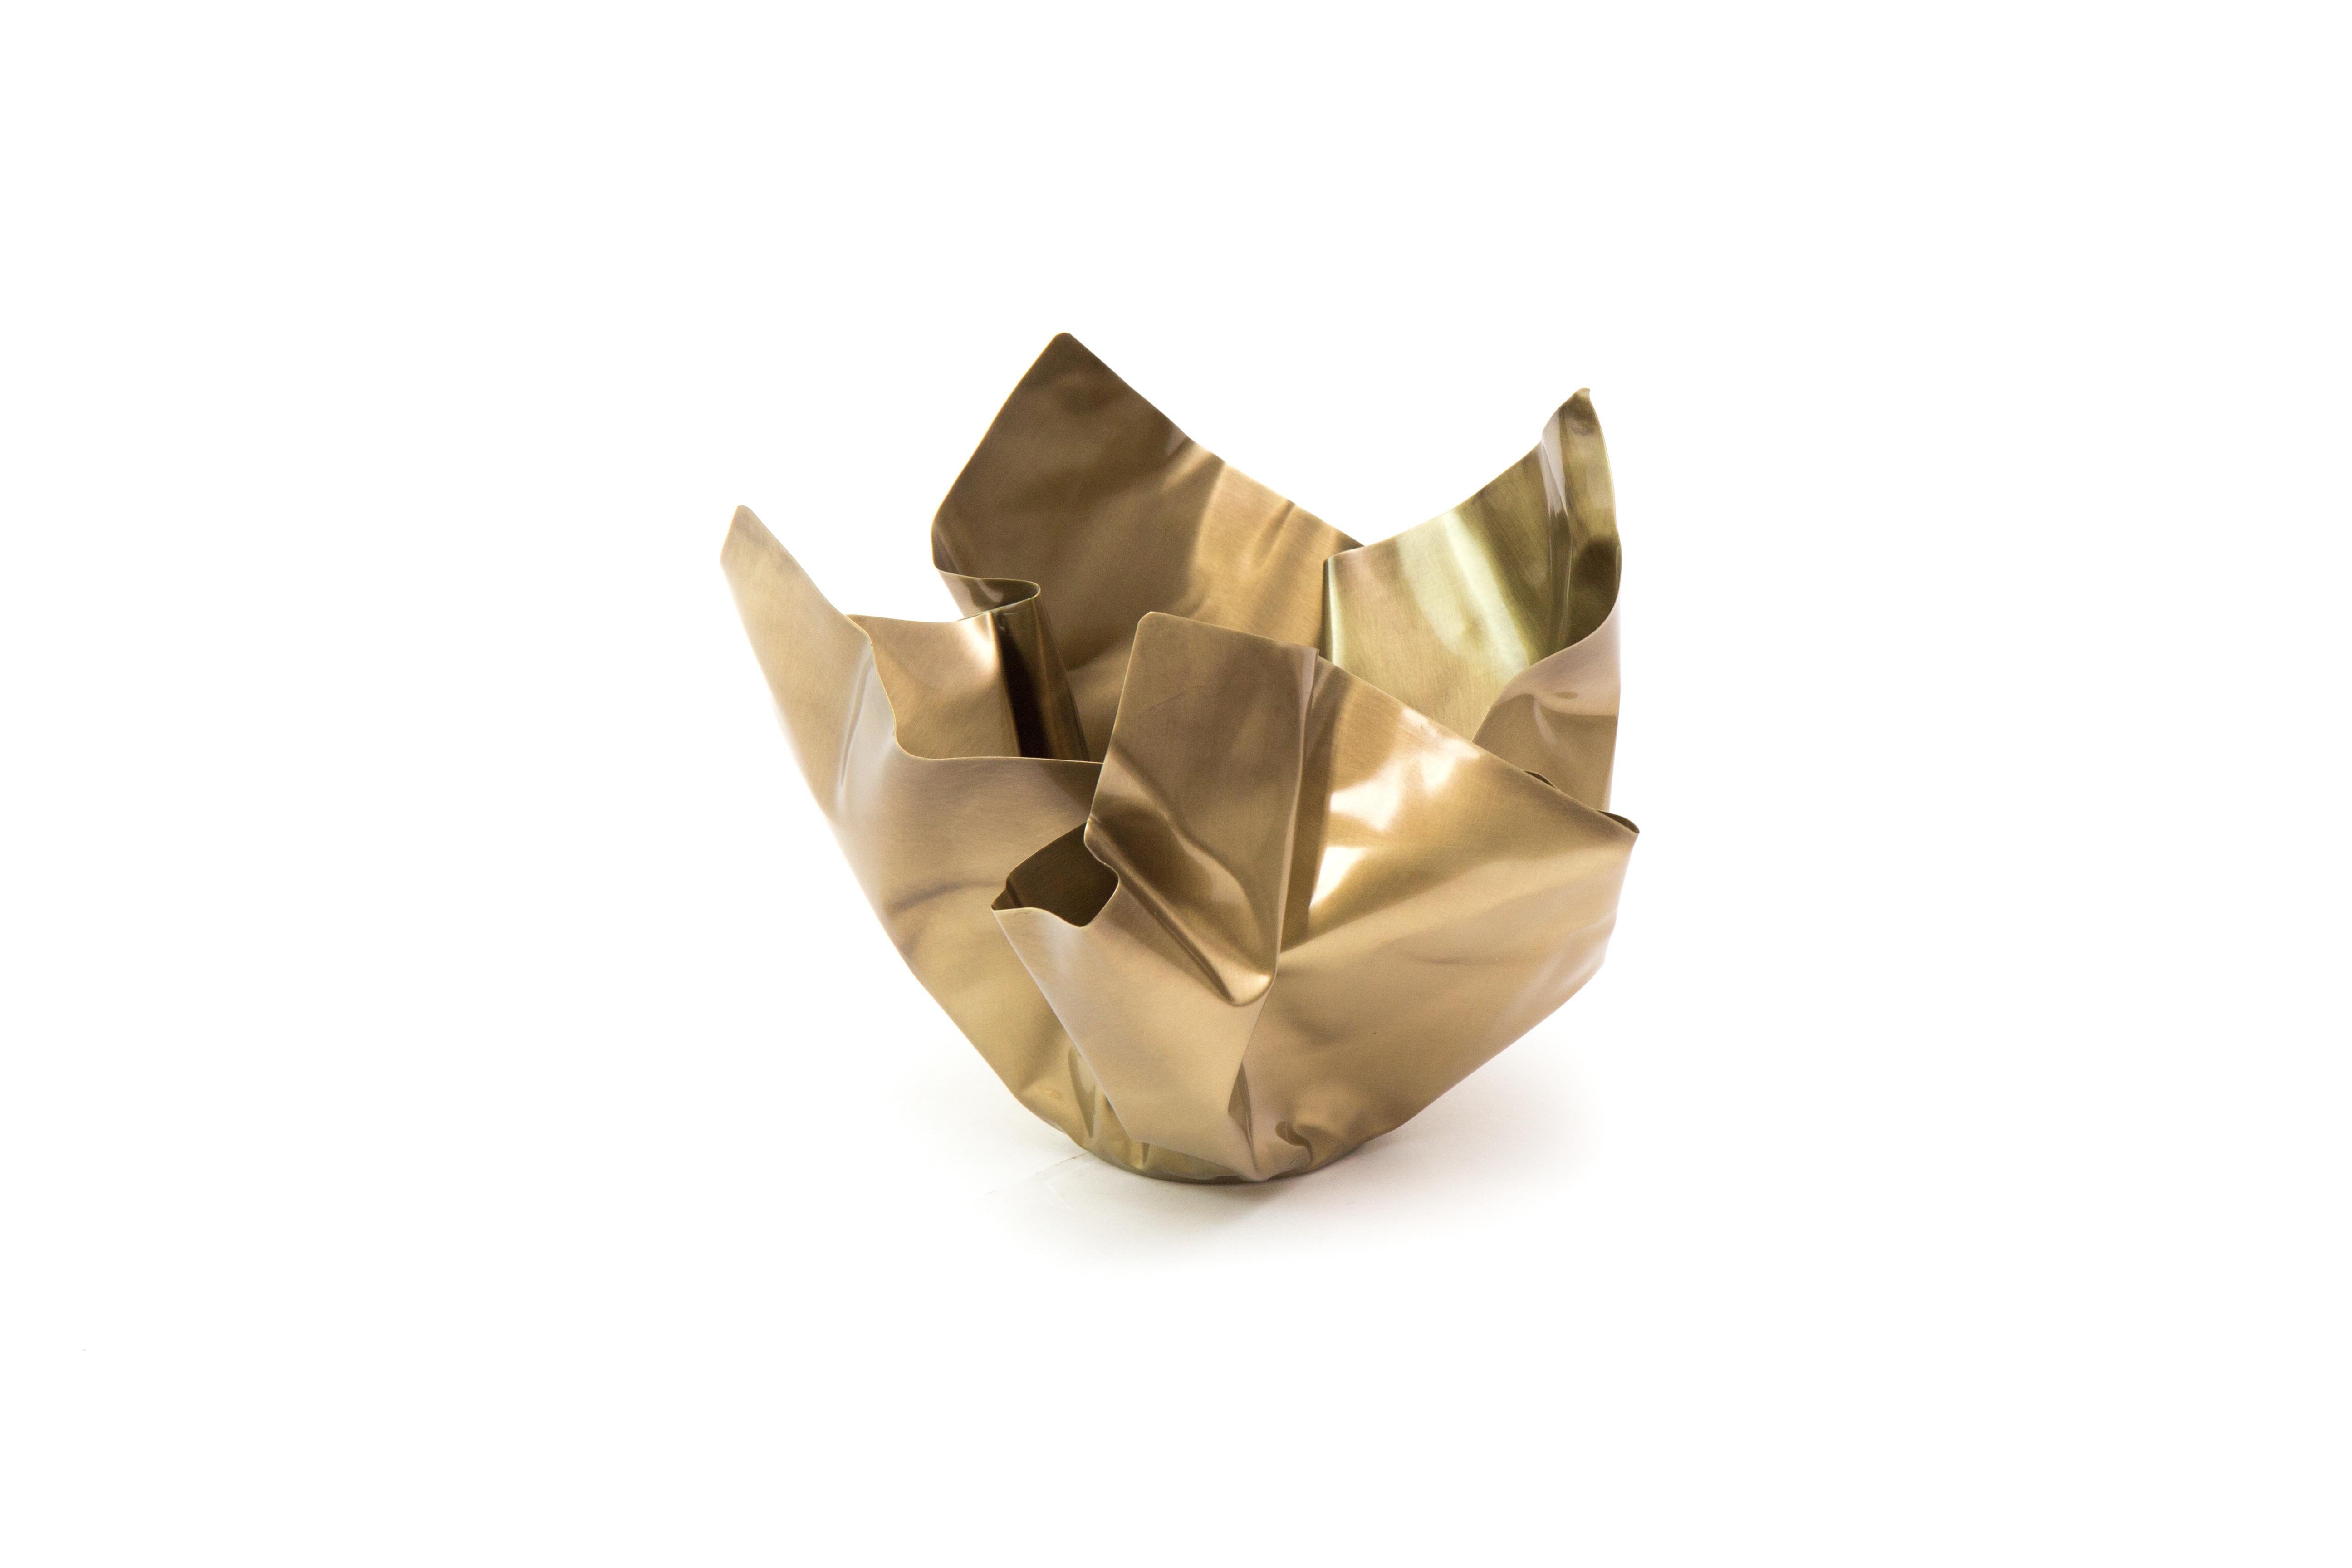 Paper brass bowl II by Gentner Design
Dimensions: D 17.7 x W 22.8 x H 14 cm
Materials: tarnished brass
Available in tarnished brass and darkened brass.

The Paper Series embodies the idea of crumpling paper set in time. The materiality of the